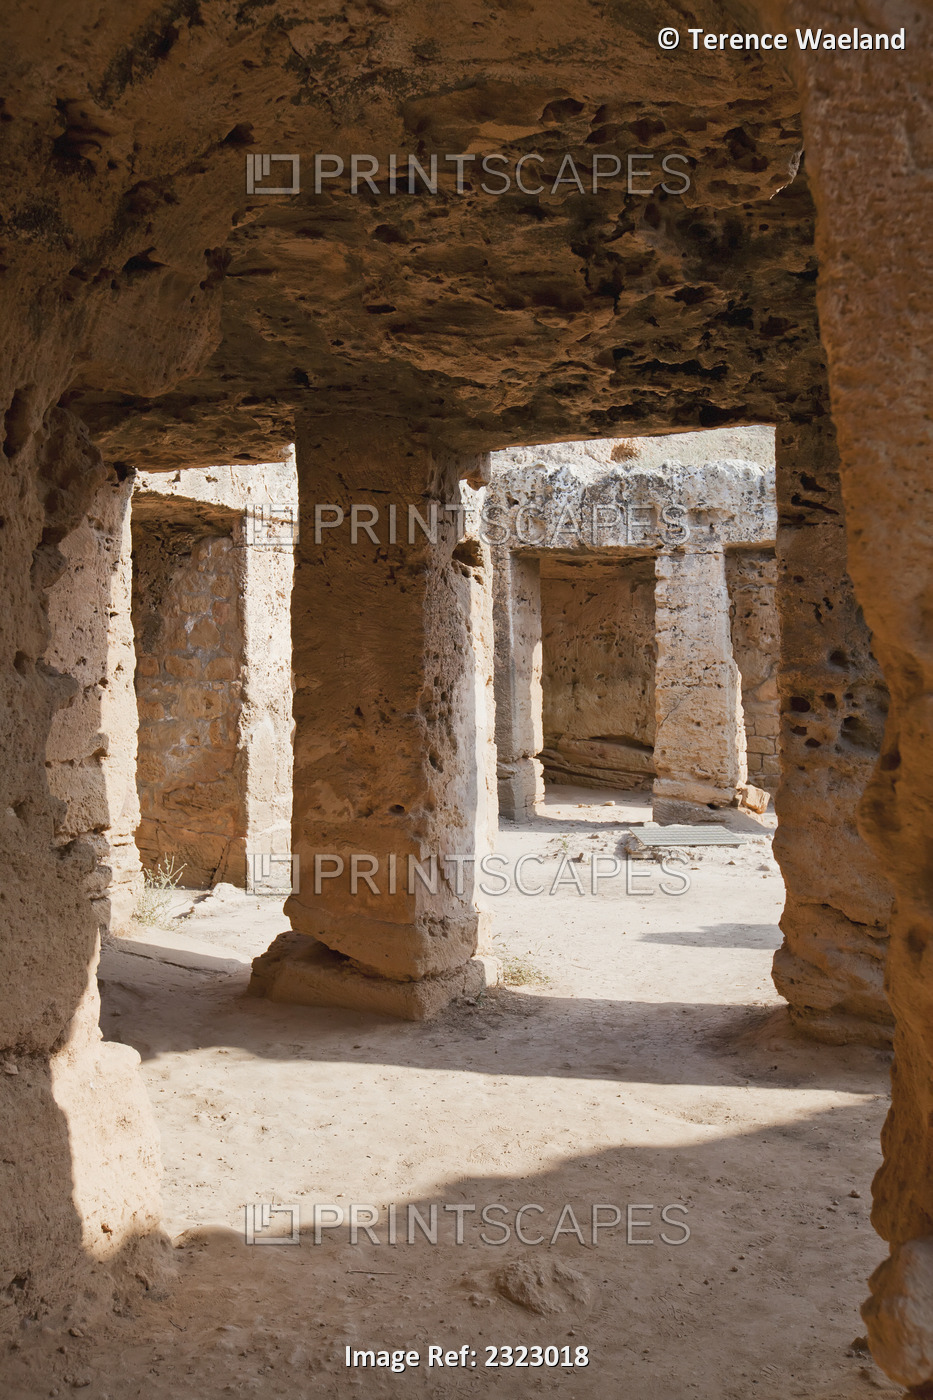 Cyprus, Paphos, Tomb of the Kings